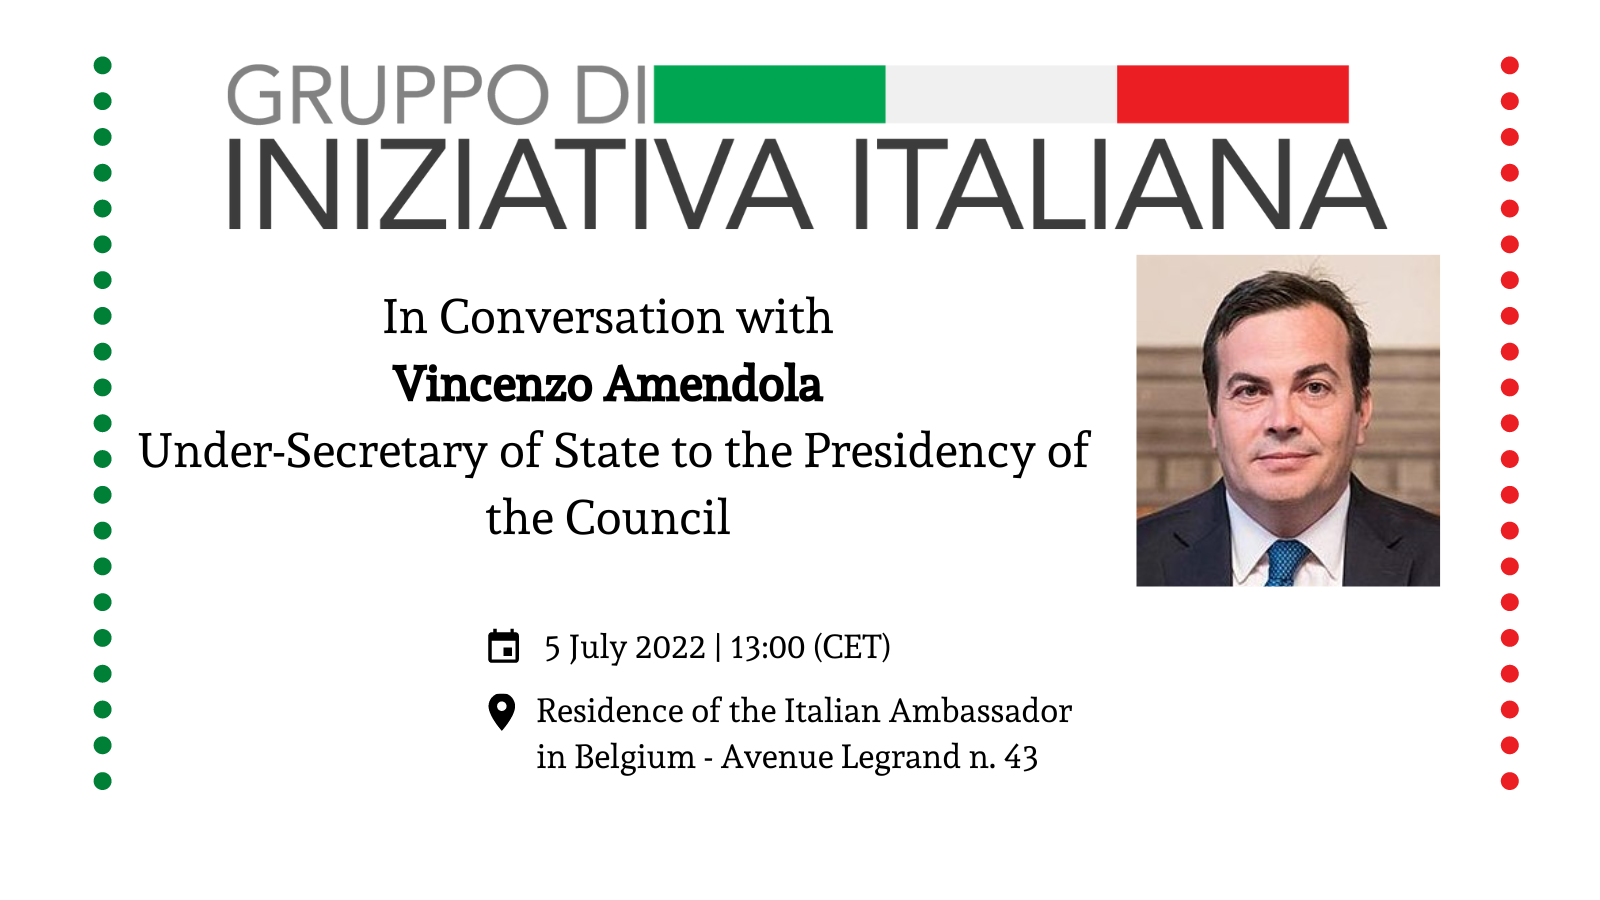 In conversation with Vincenzo Amendola | Under-Secretary of State to the Presidency of the Council of Ministers